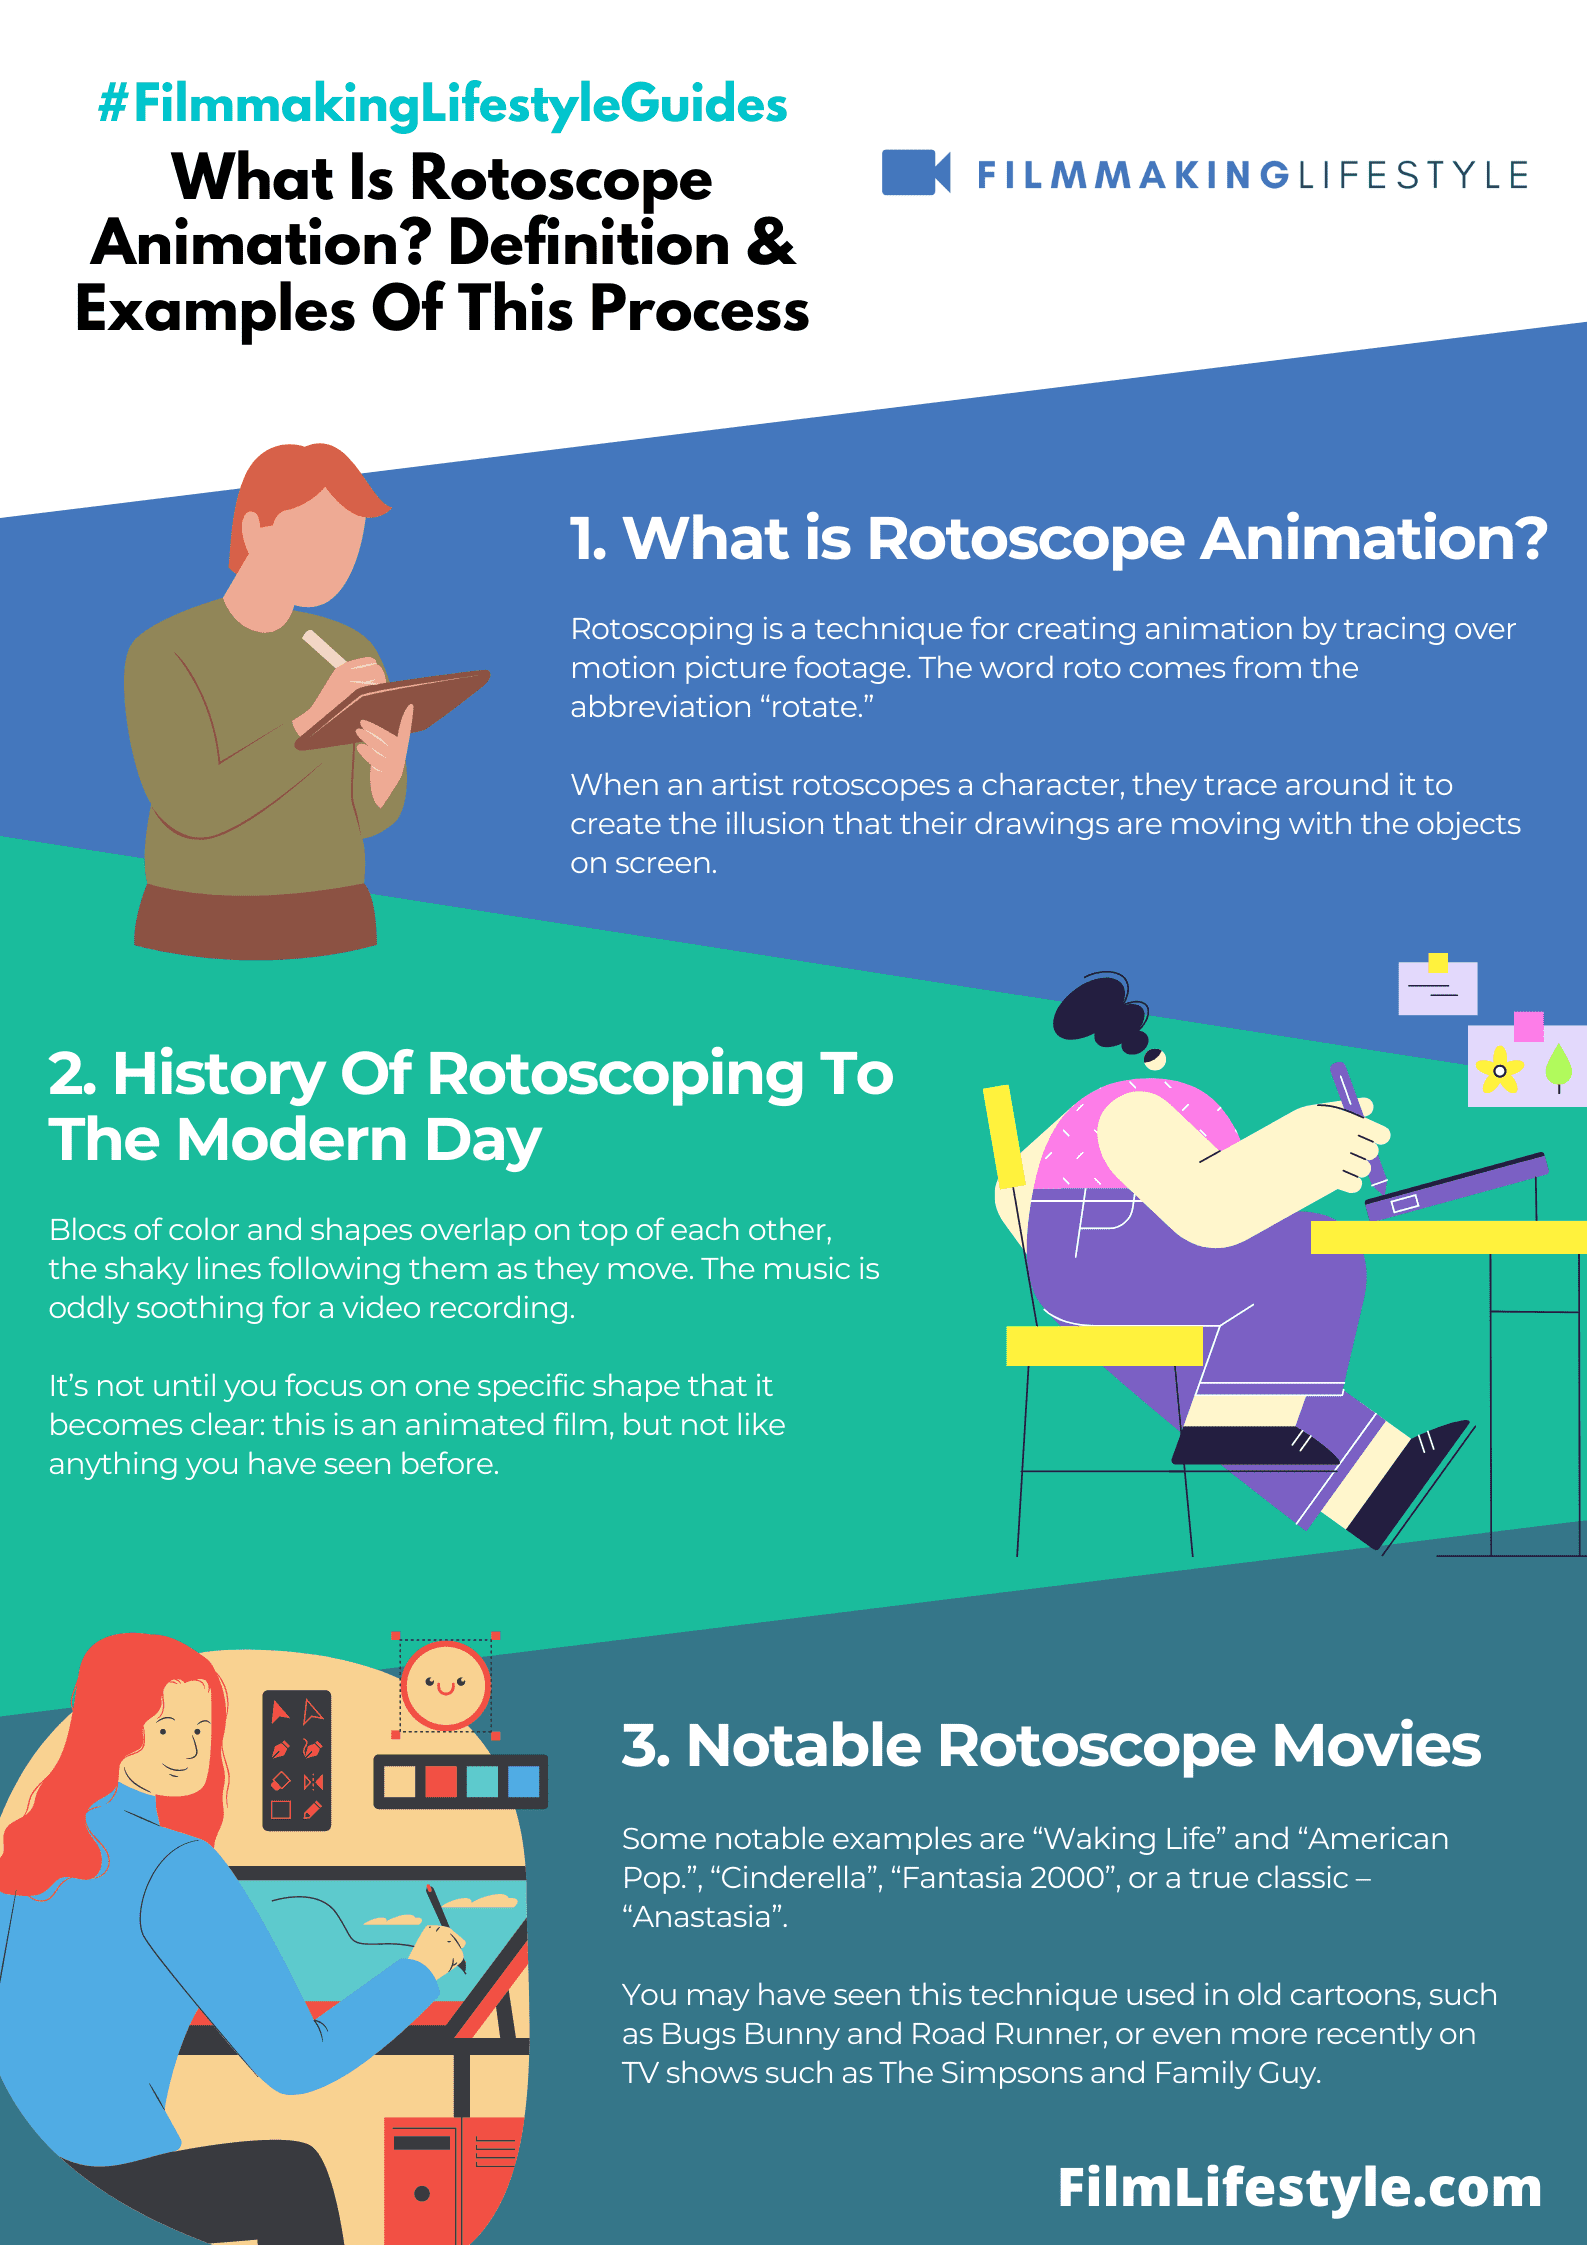 What Is Rotoscope Animation